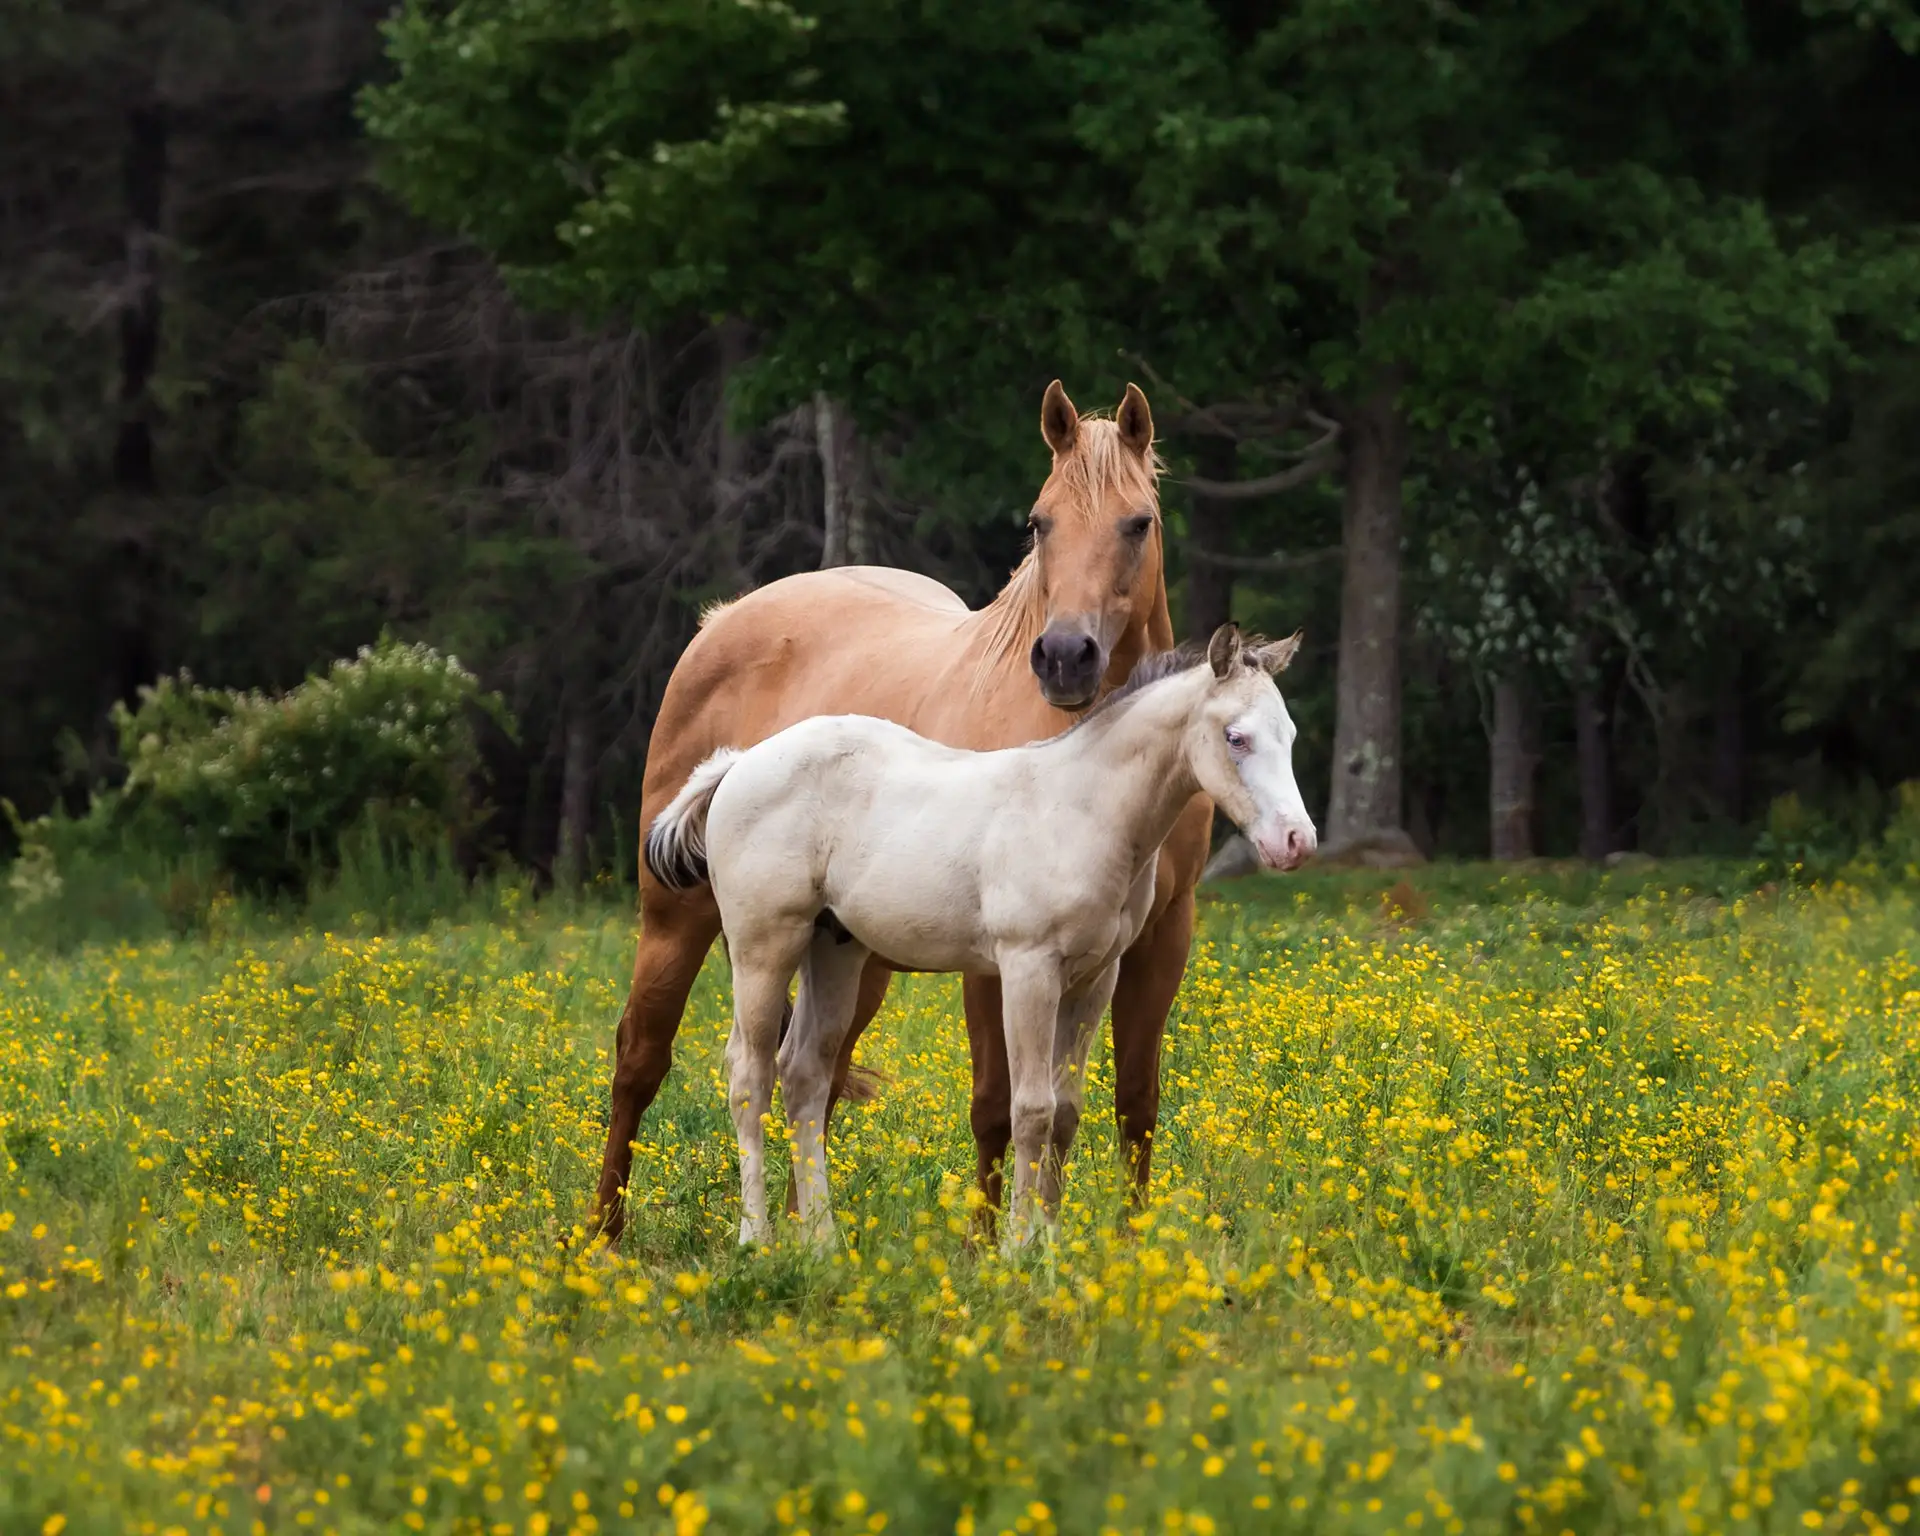 Two horses in a field of flowers